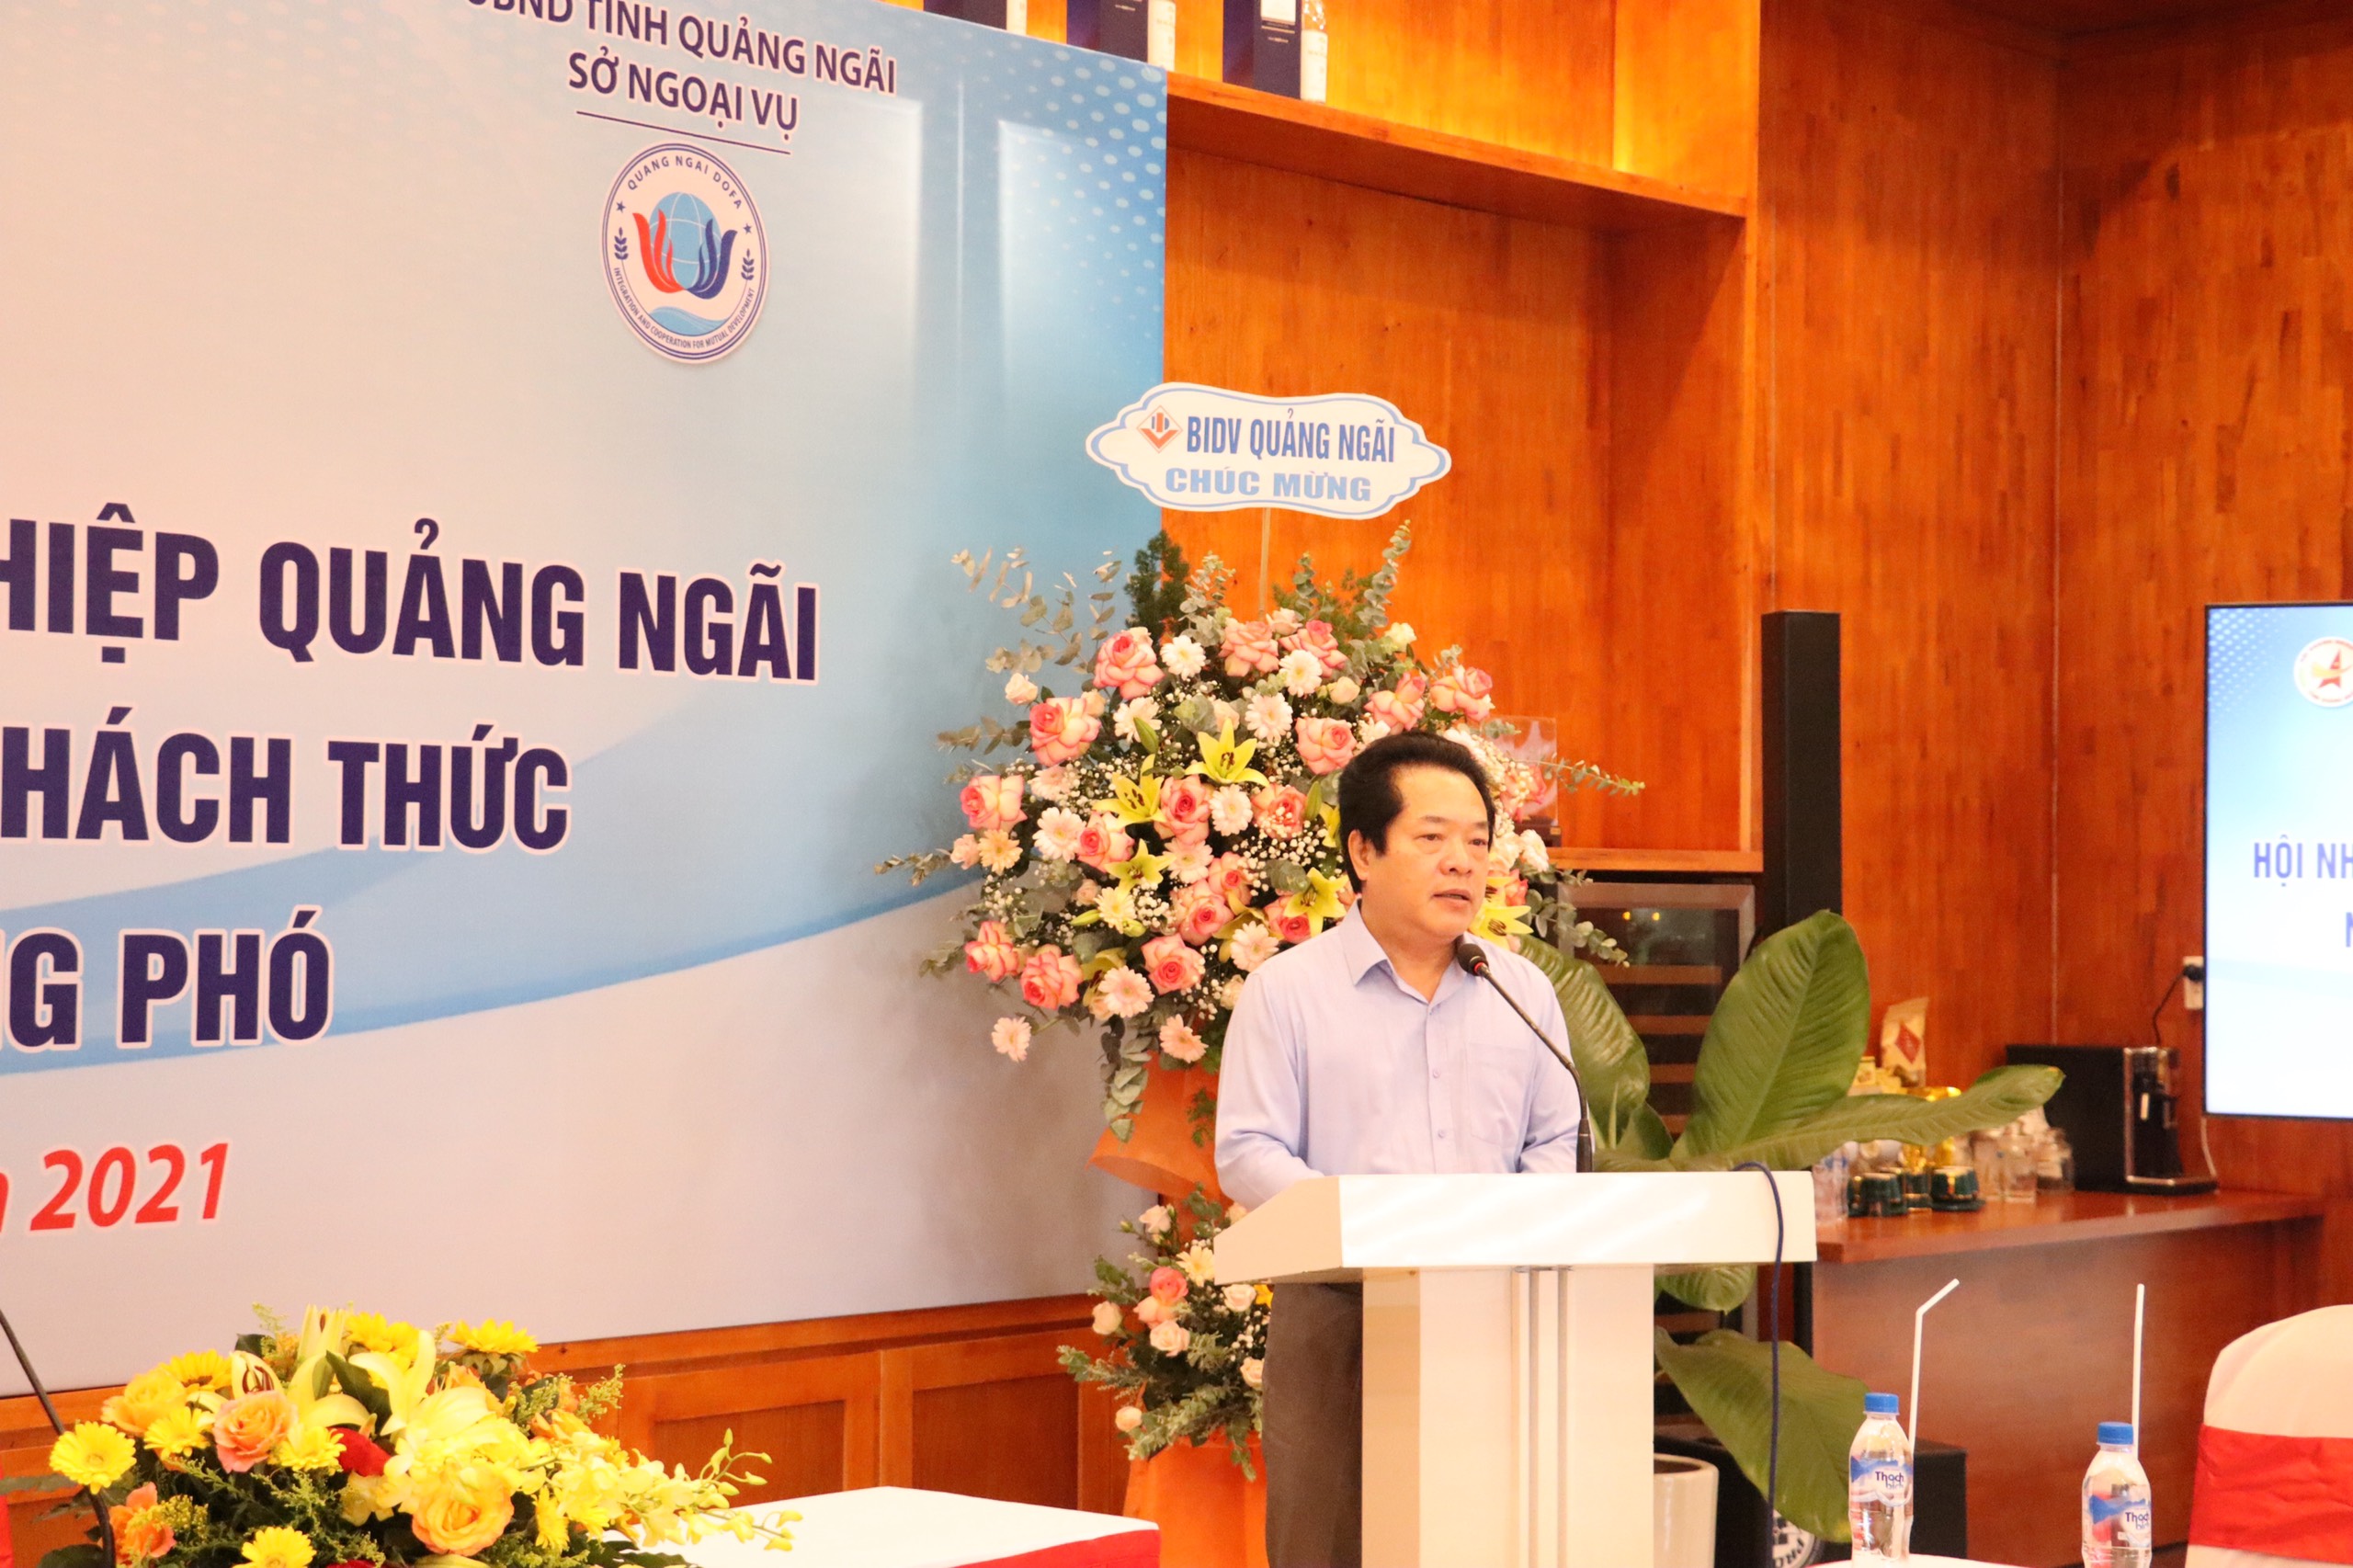 Strengthening legal support activities for small and medium enterprises in Quang Ngai province in 2022 and the following years